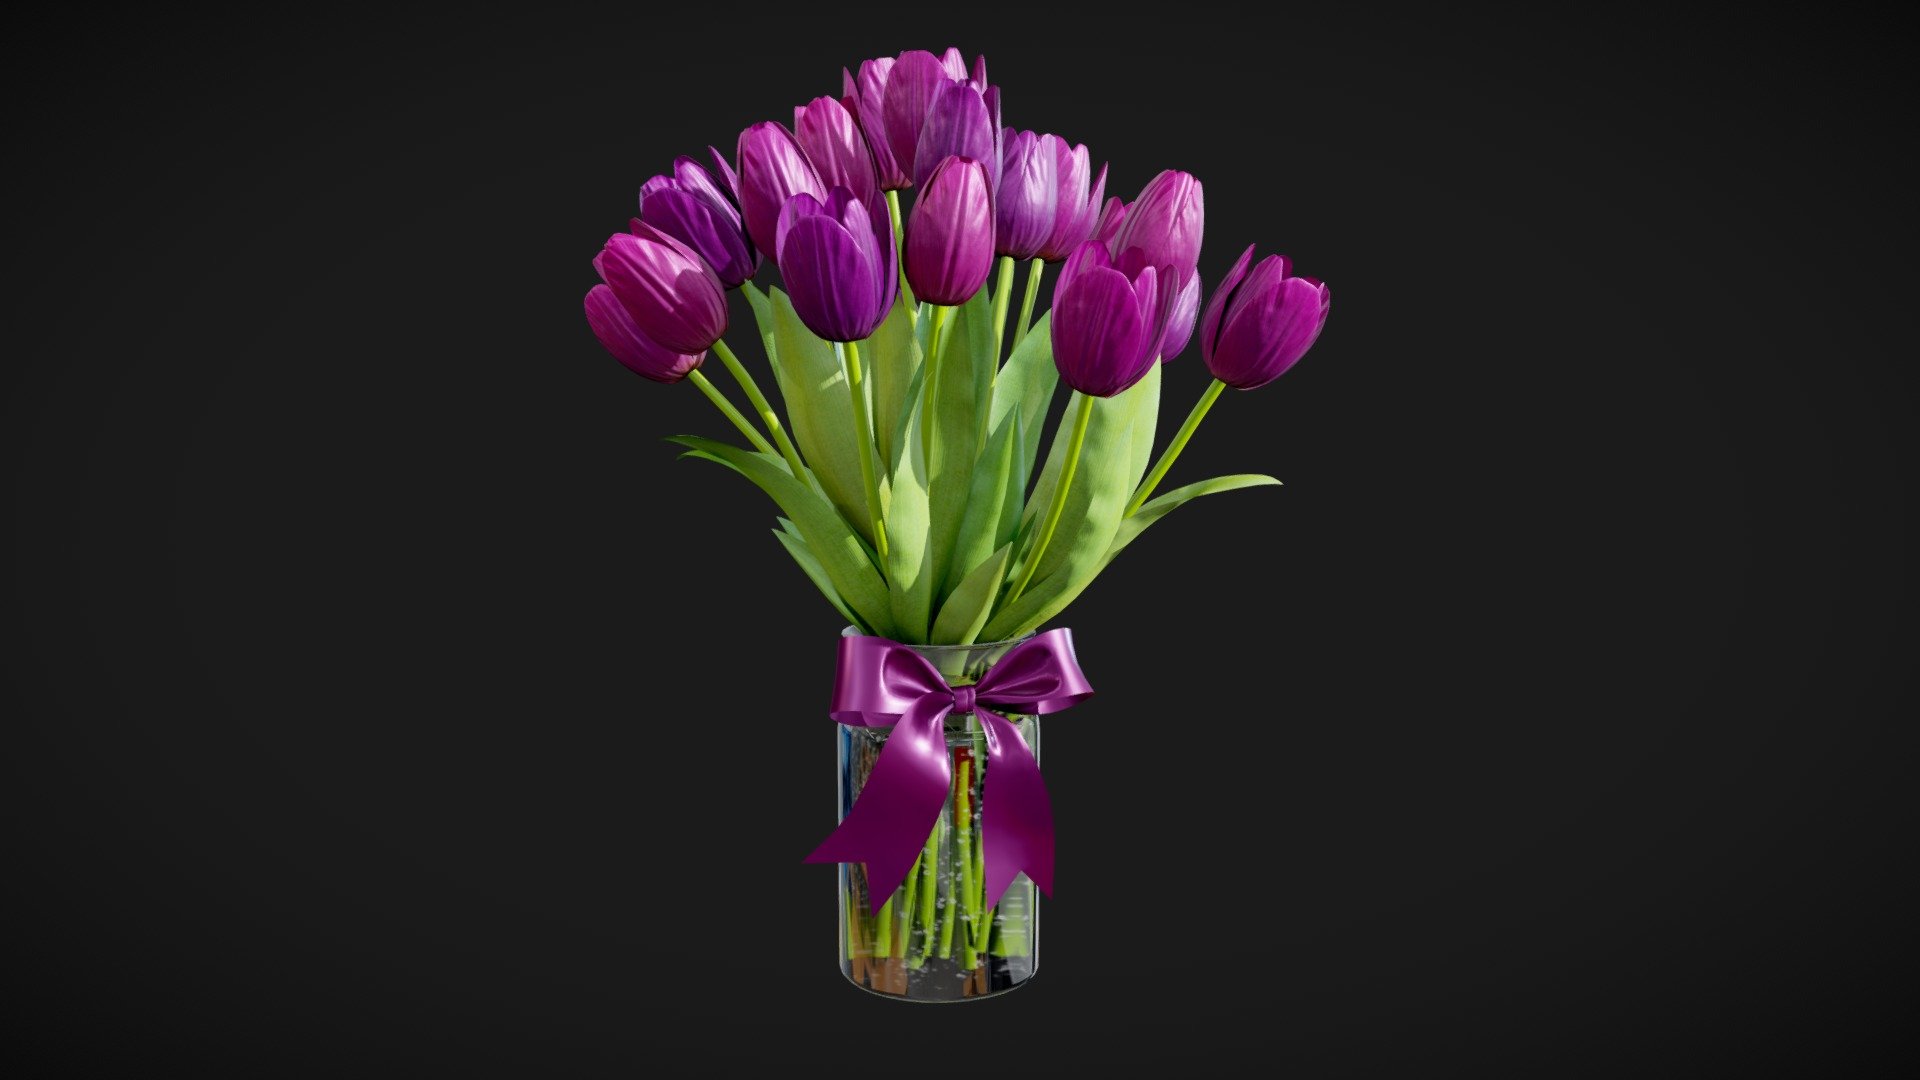 High quality 3d model of a Purple Tulips Bouquet in a glass vase 3d model